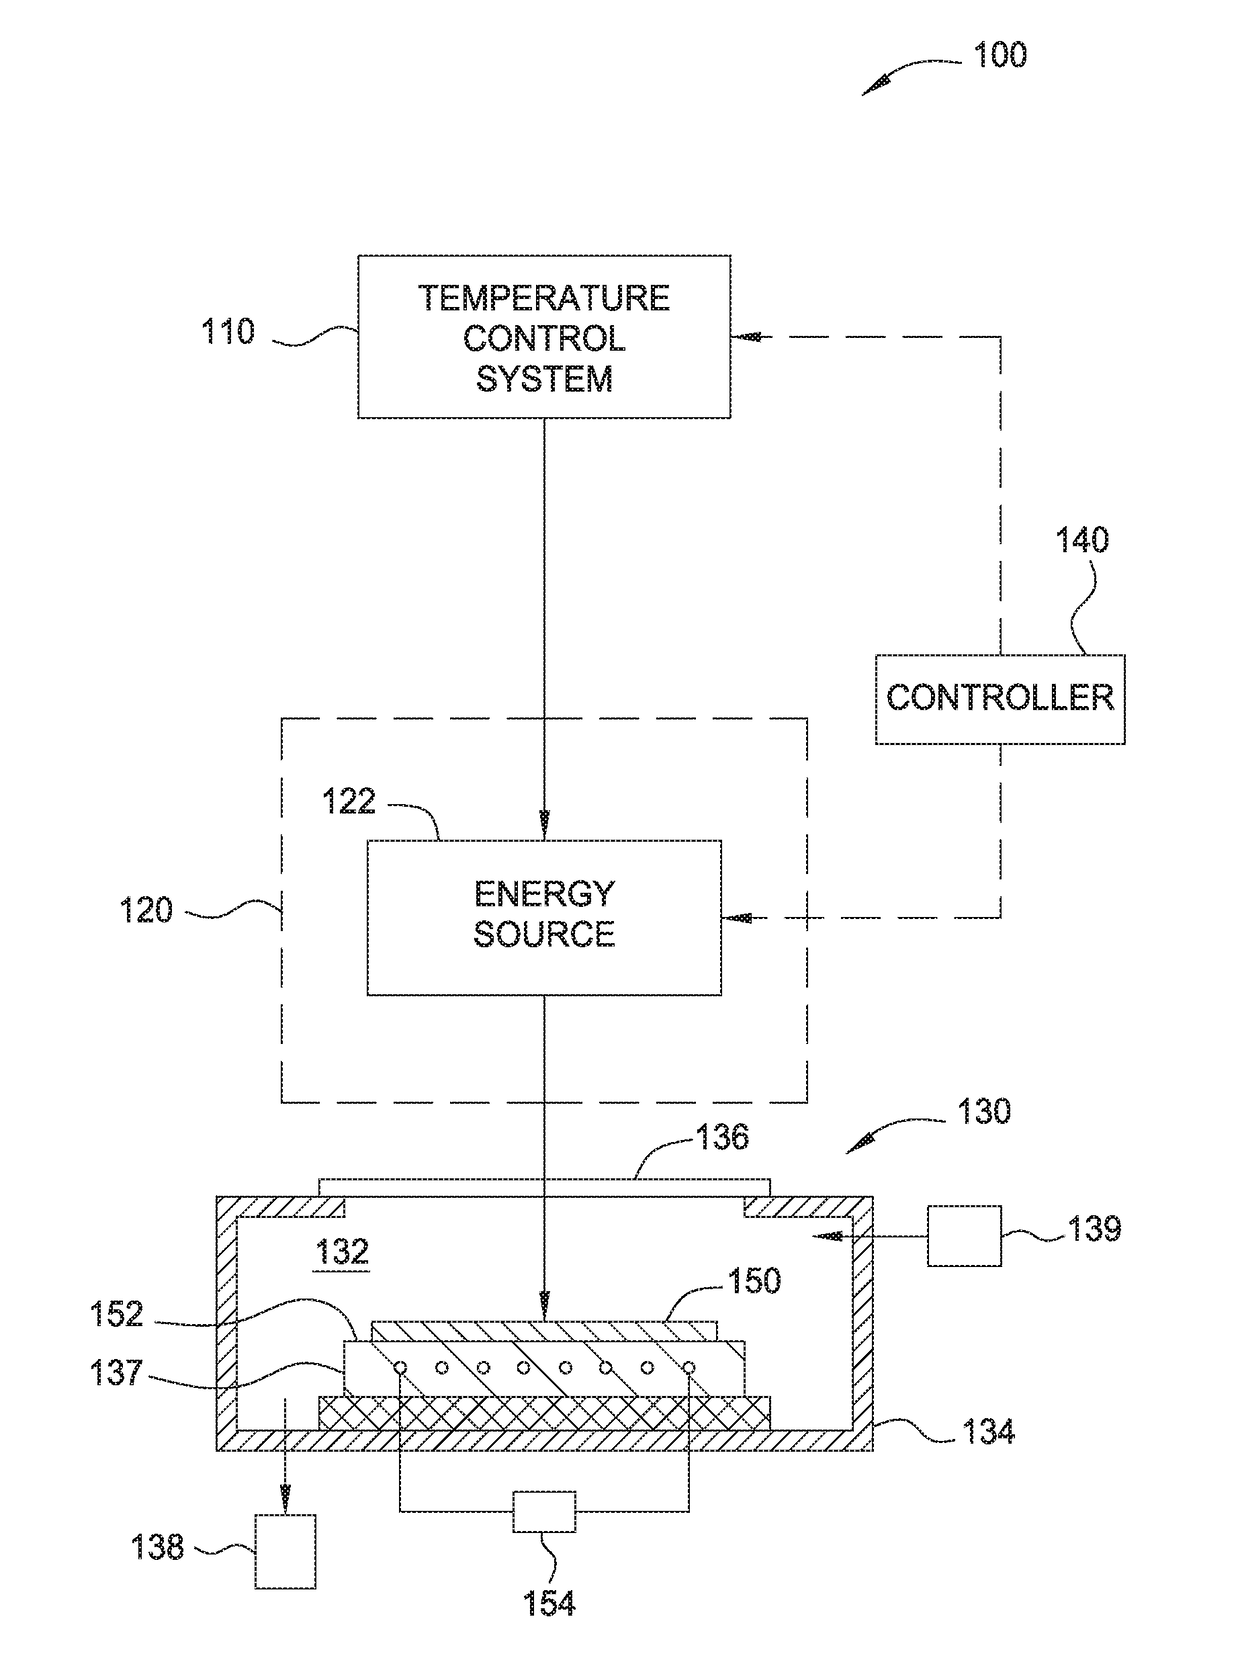 Coolant and a method to control the ph and resistivity of coolant used in a heat exchanger